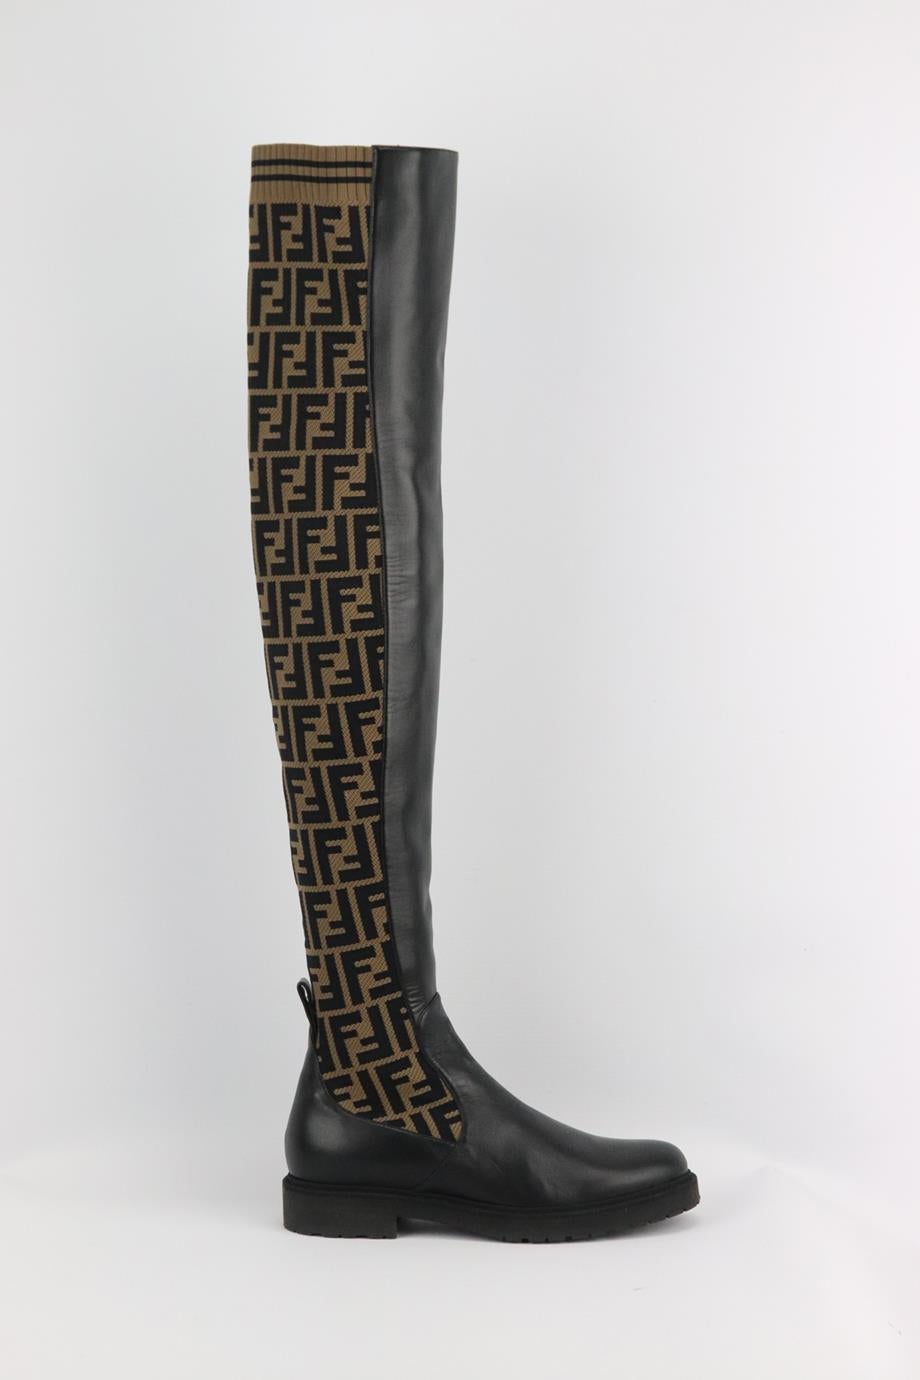 Fendi logo jacquard stretch knit and leather over the knee boots. Black, beige and brown. Pull on. Does not come with box or dustbag.Size: EU 38 (UK 5, US 8). Shaft: 26 in. Outersole: 10.8 in. Heel: 1 in
